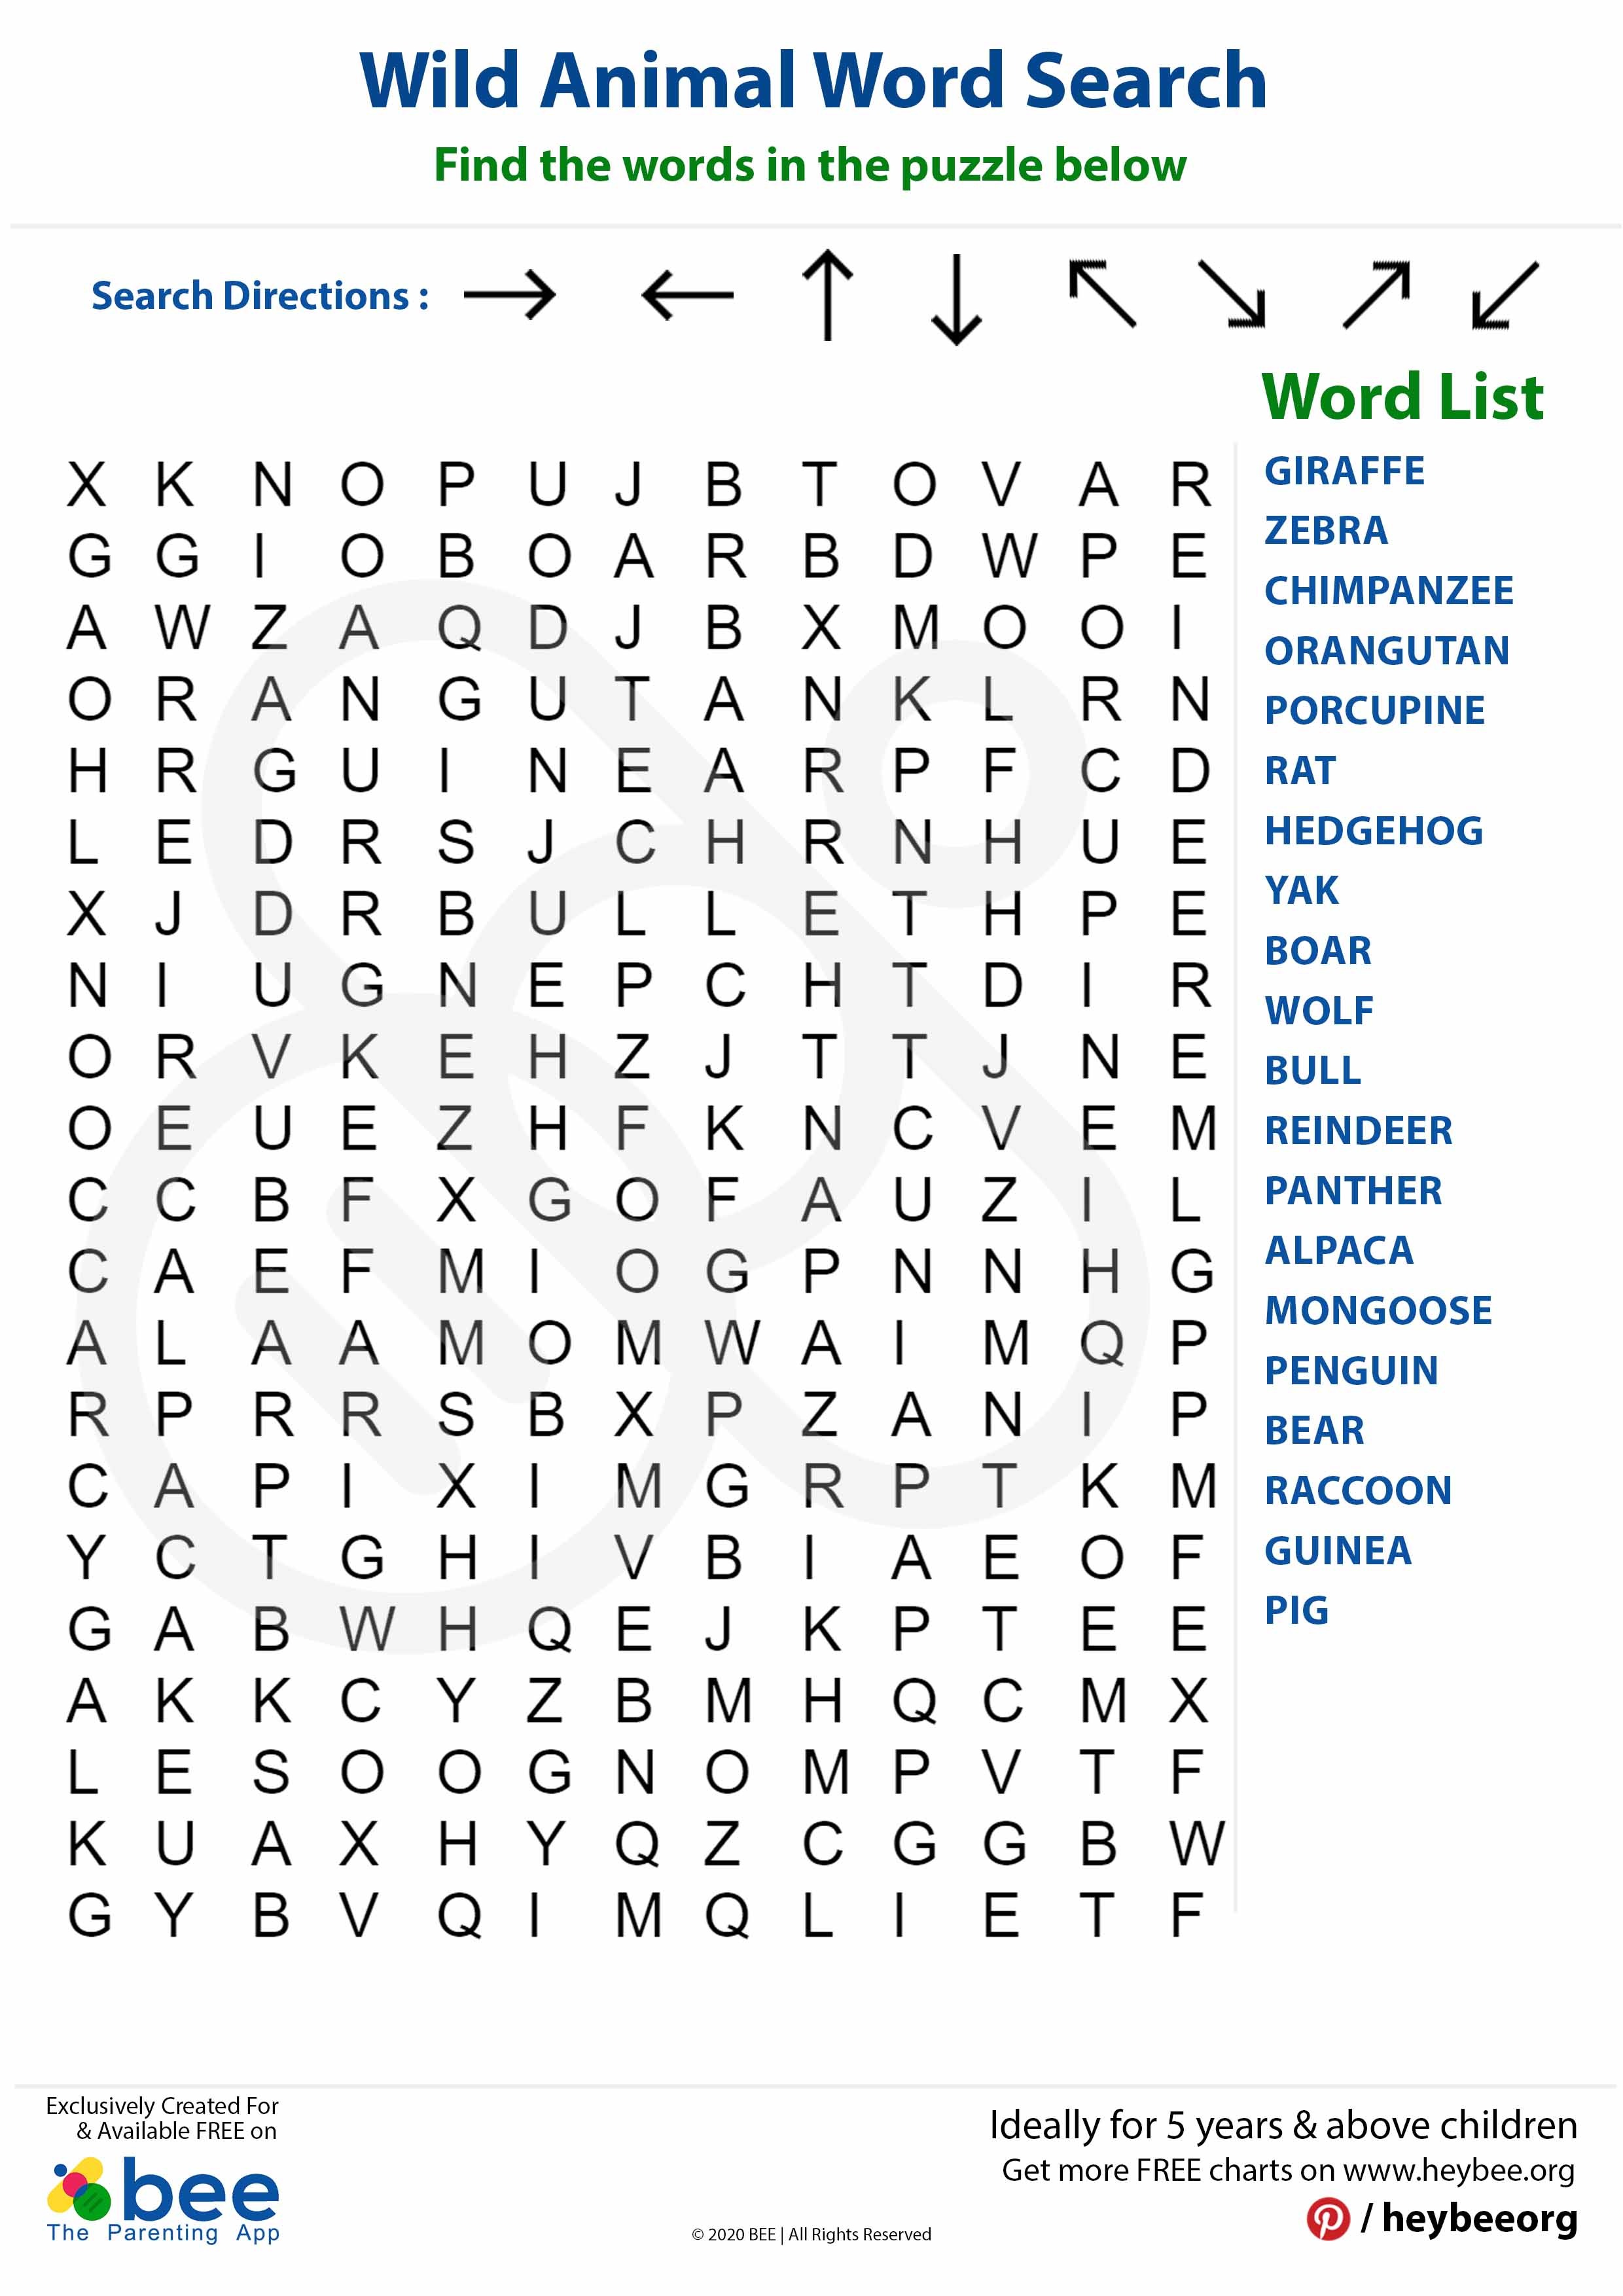 Wild Animal Word Search 2